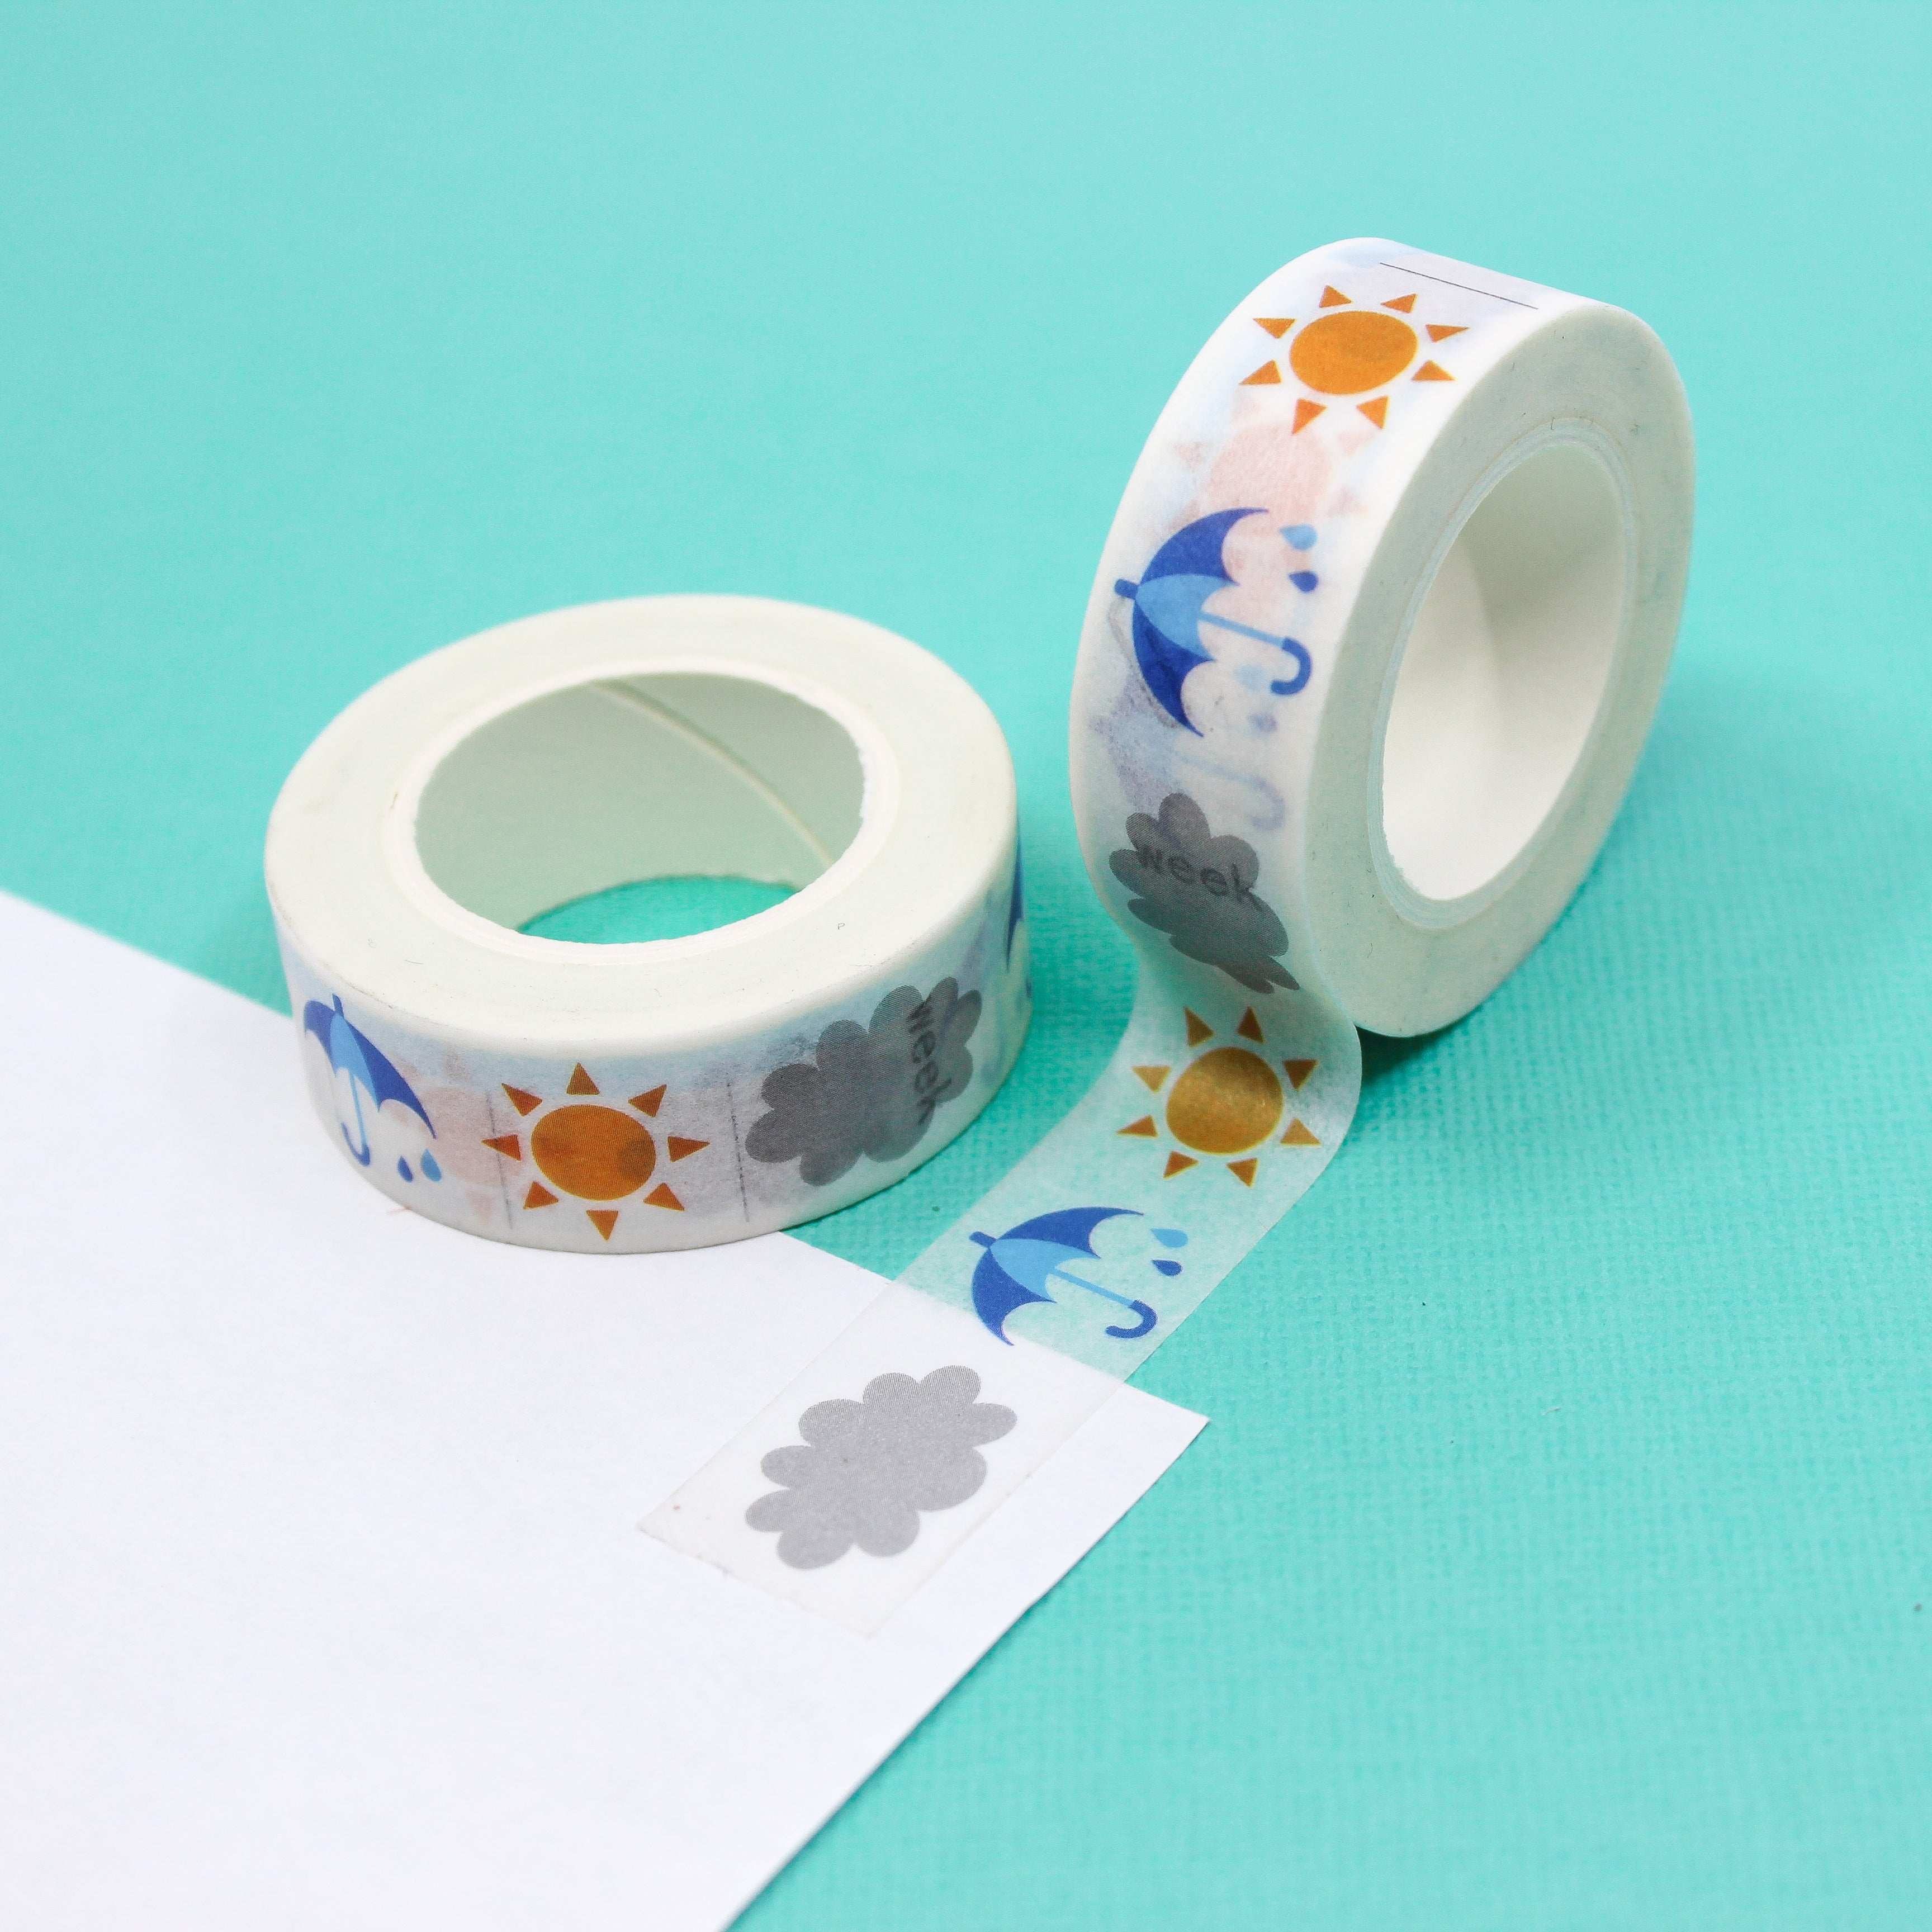 This is a rain items pattern view themed washi tape from BBB Supplies Craft Shop